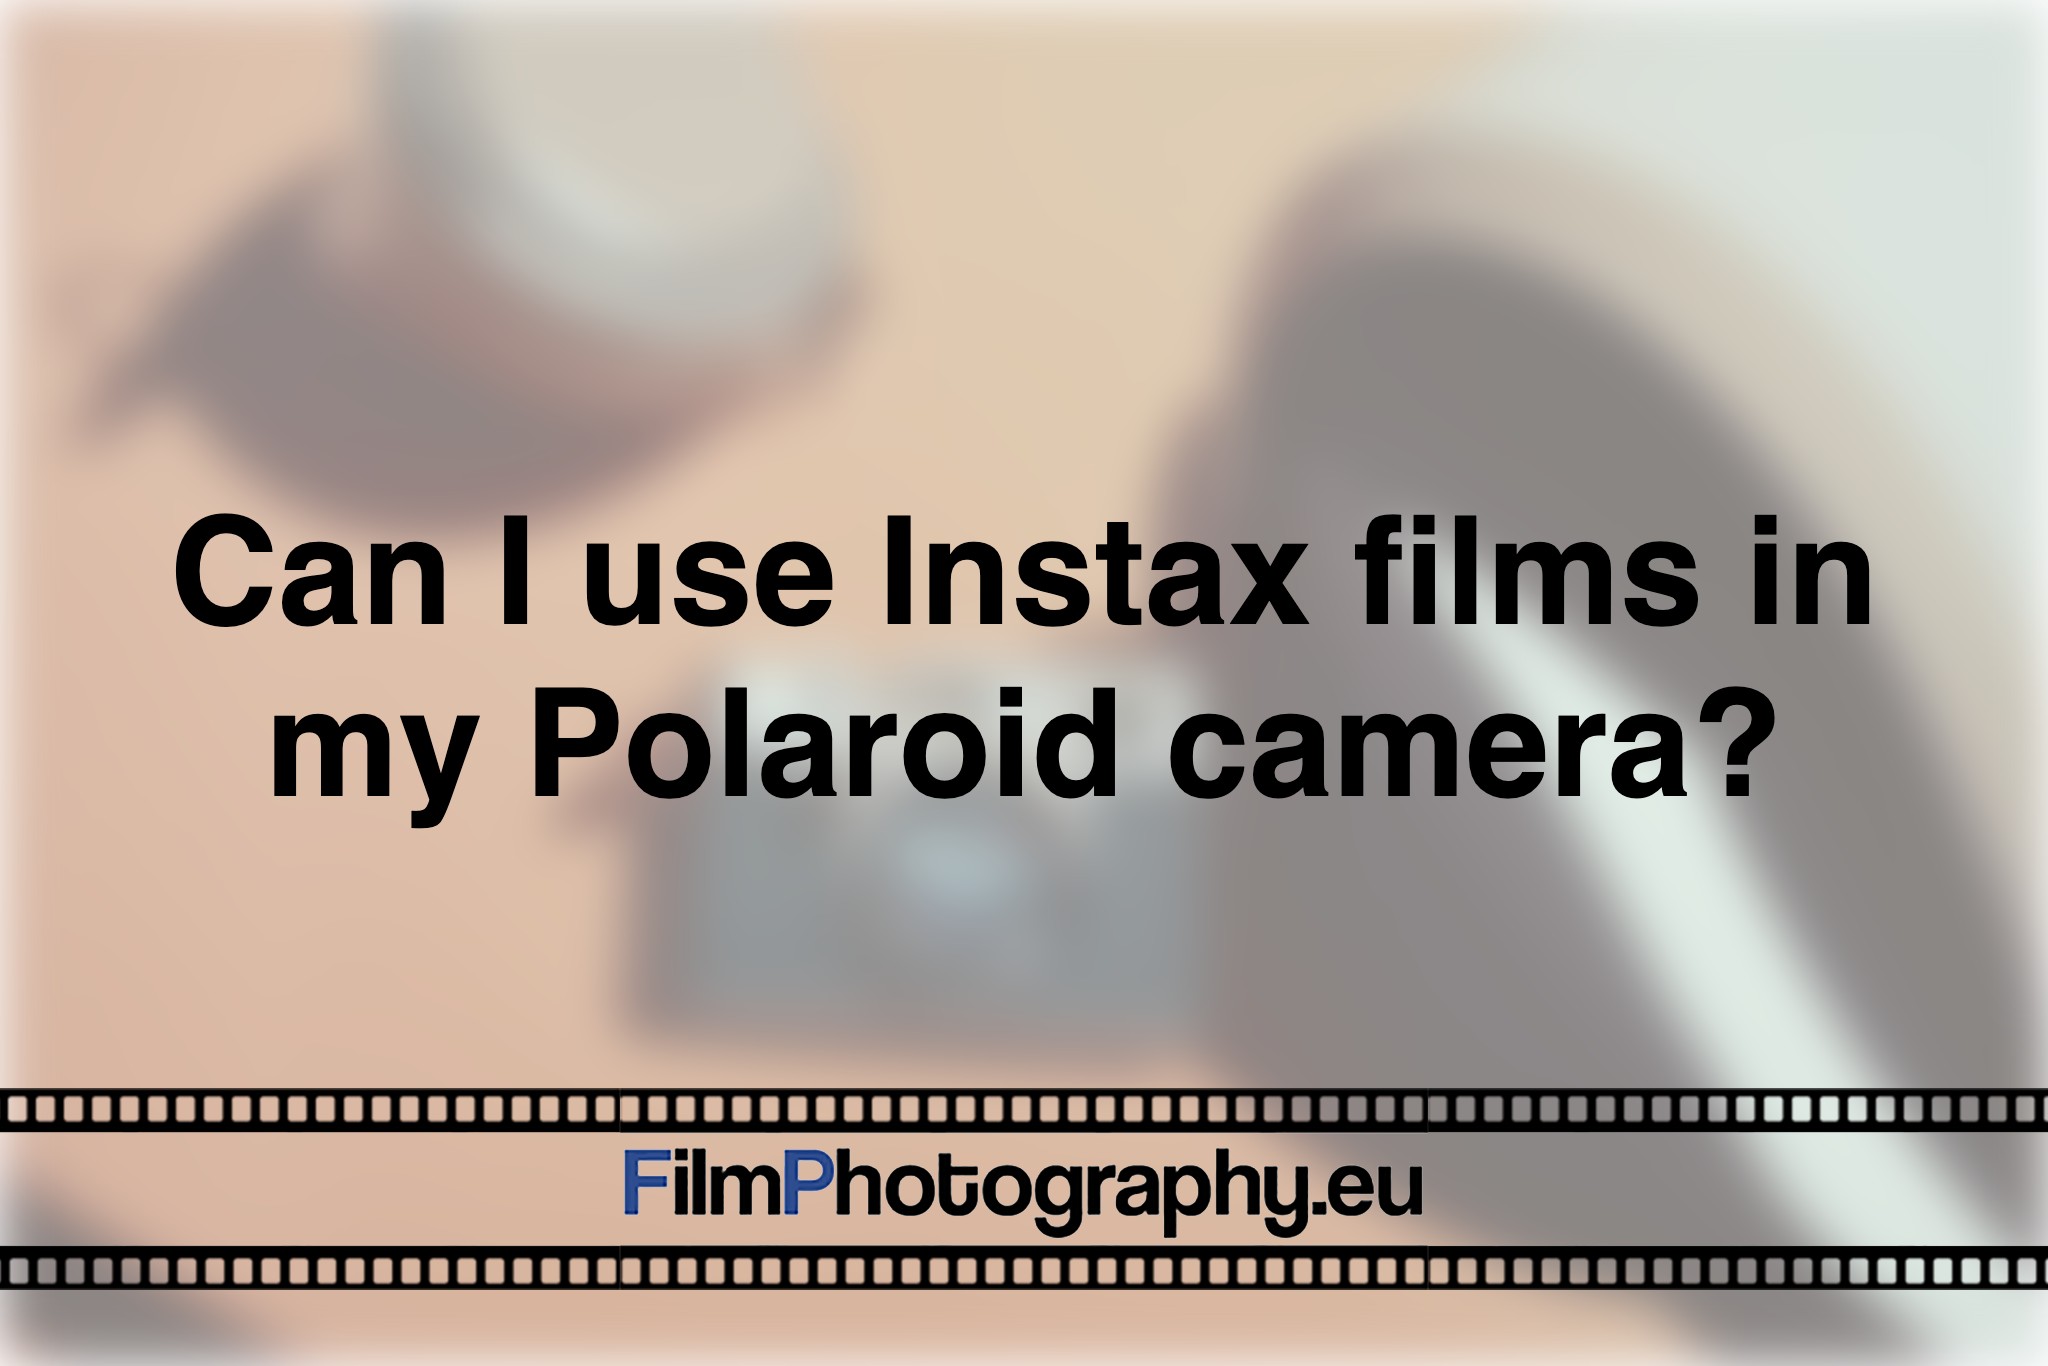 can-i-use-instax-films-in-my-polaroid-camera-photo-bnv